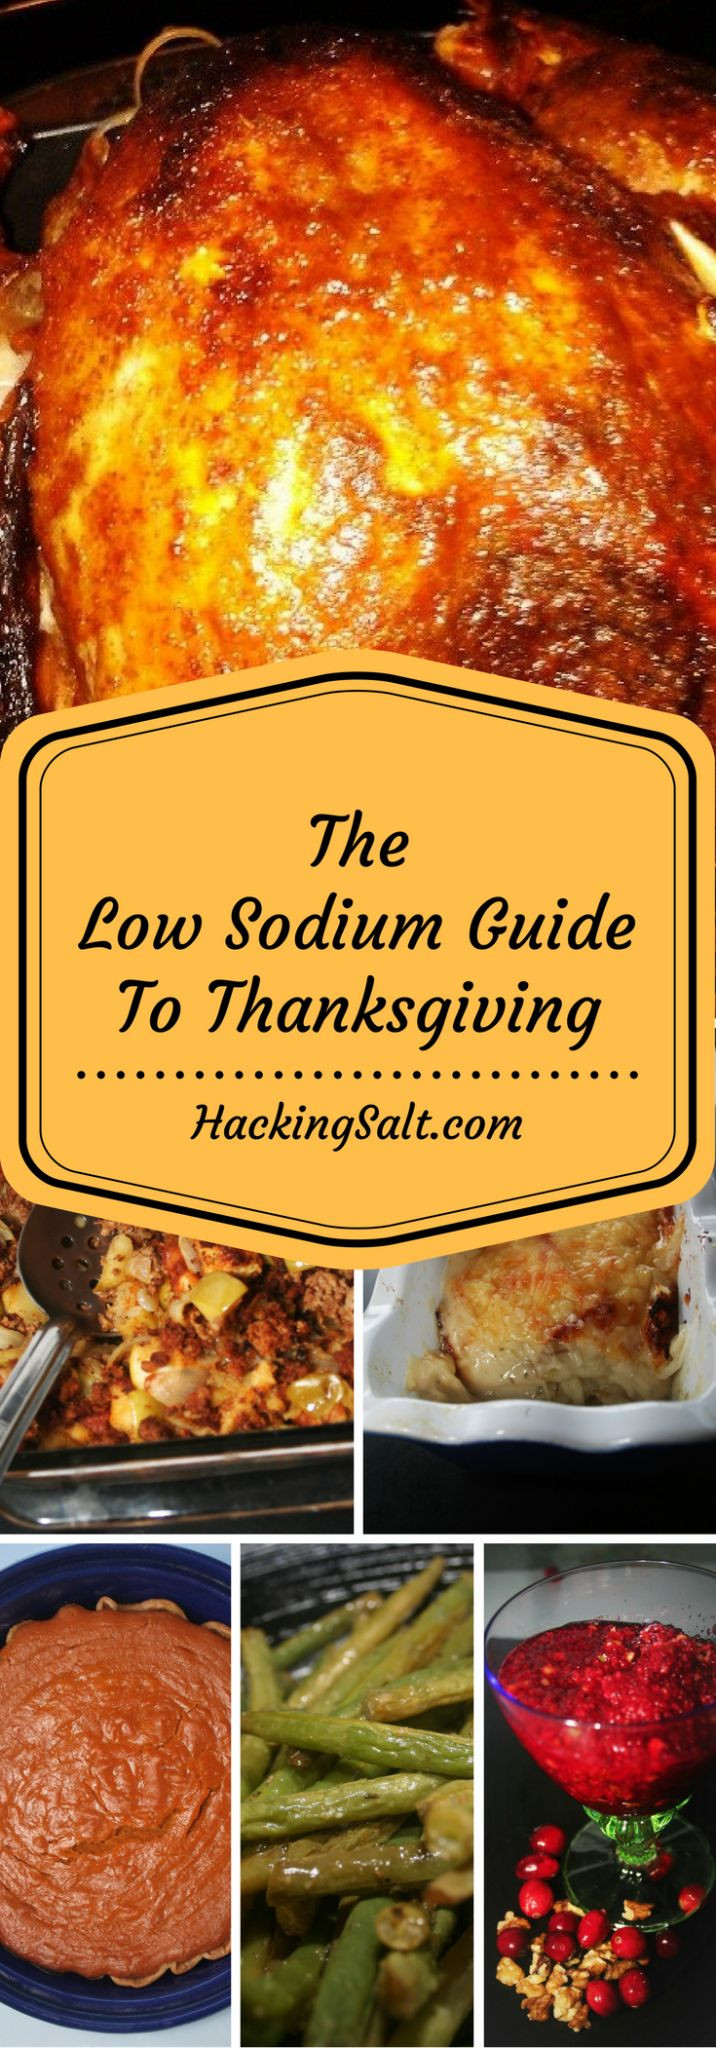 Heart Healthy Low Sodium Recipes
 92 best images about Our Low Sodium Recipes on Pinterest